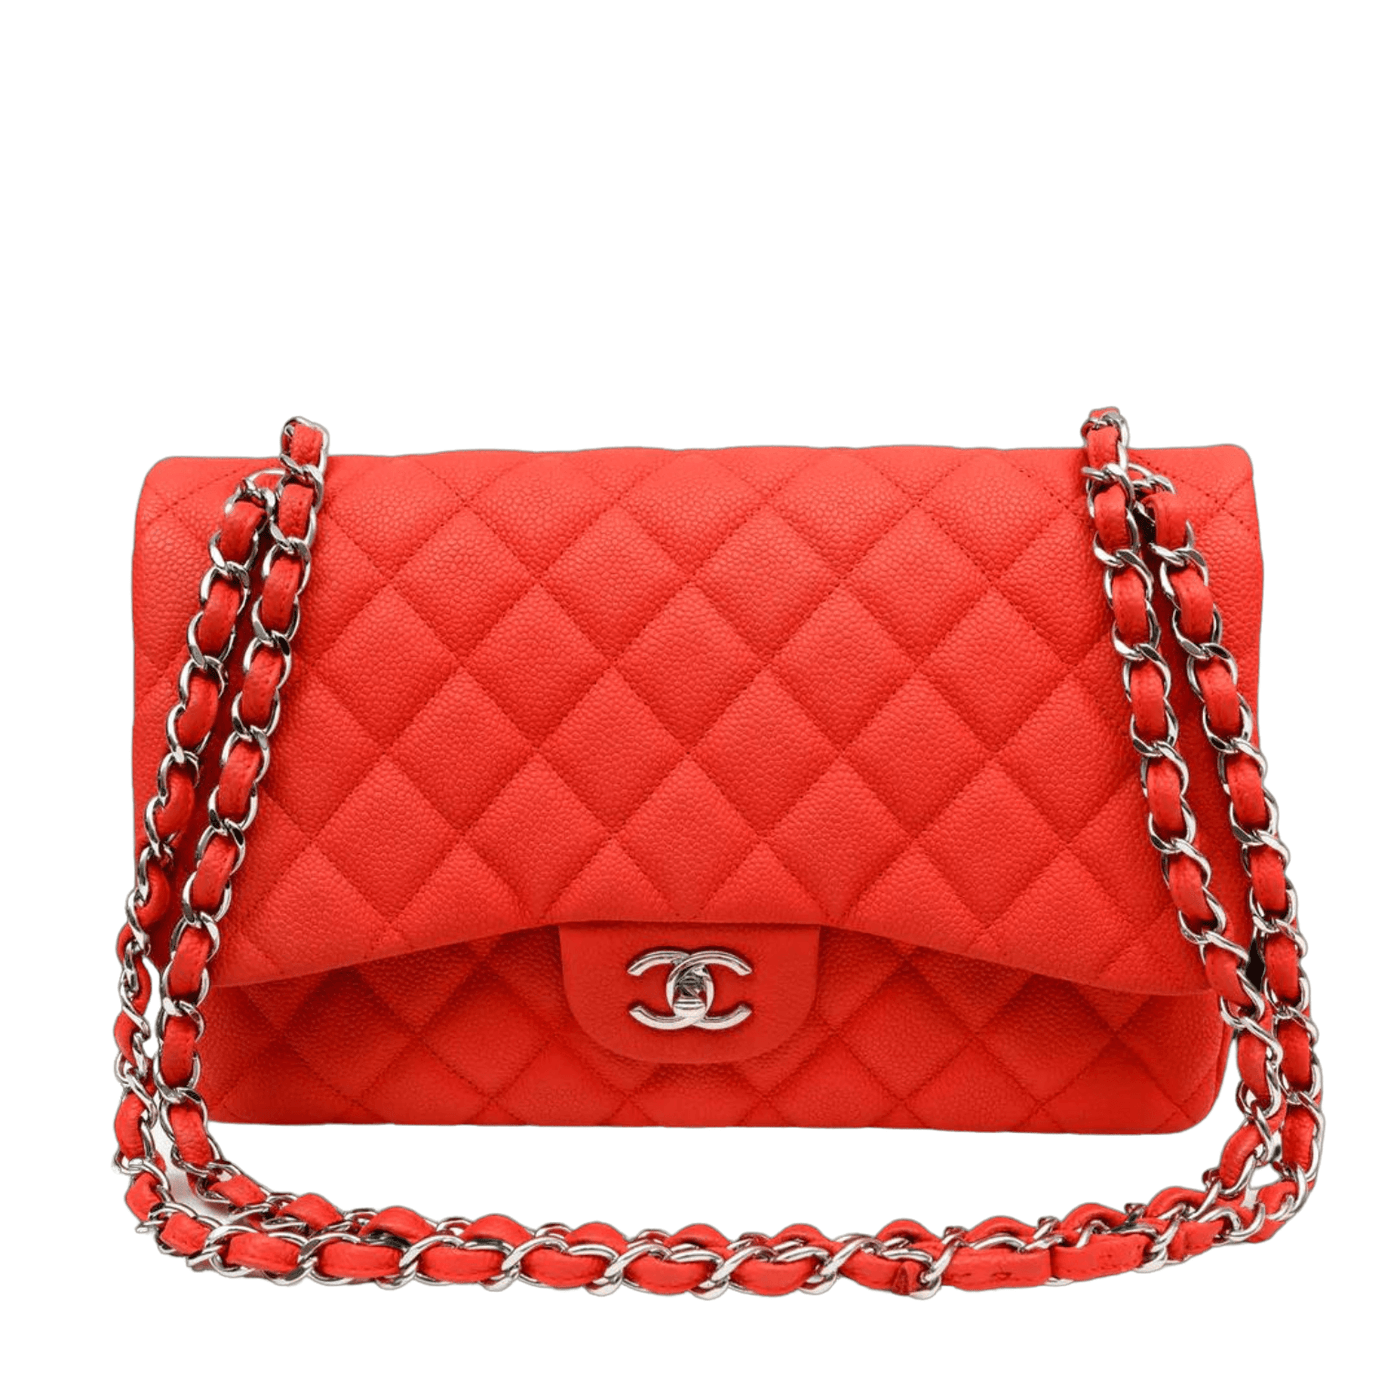 Chanel Salmon Brushed Caviar Jumbo Classic Double Flap Bag - Only Authentics